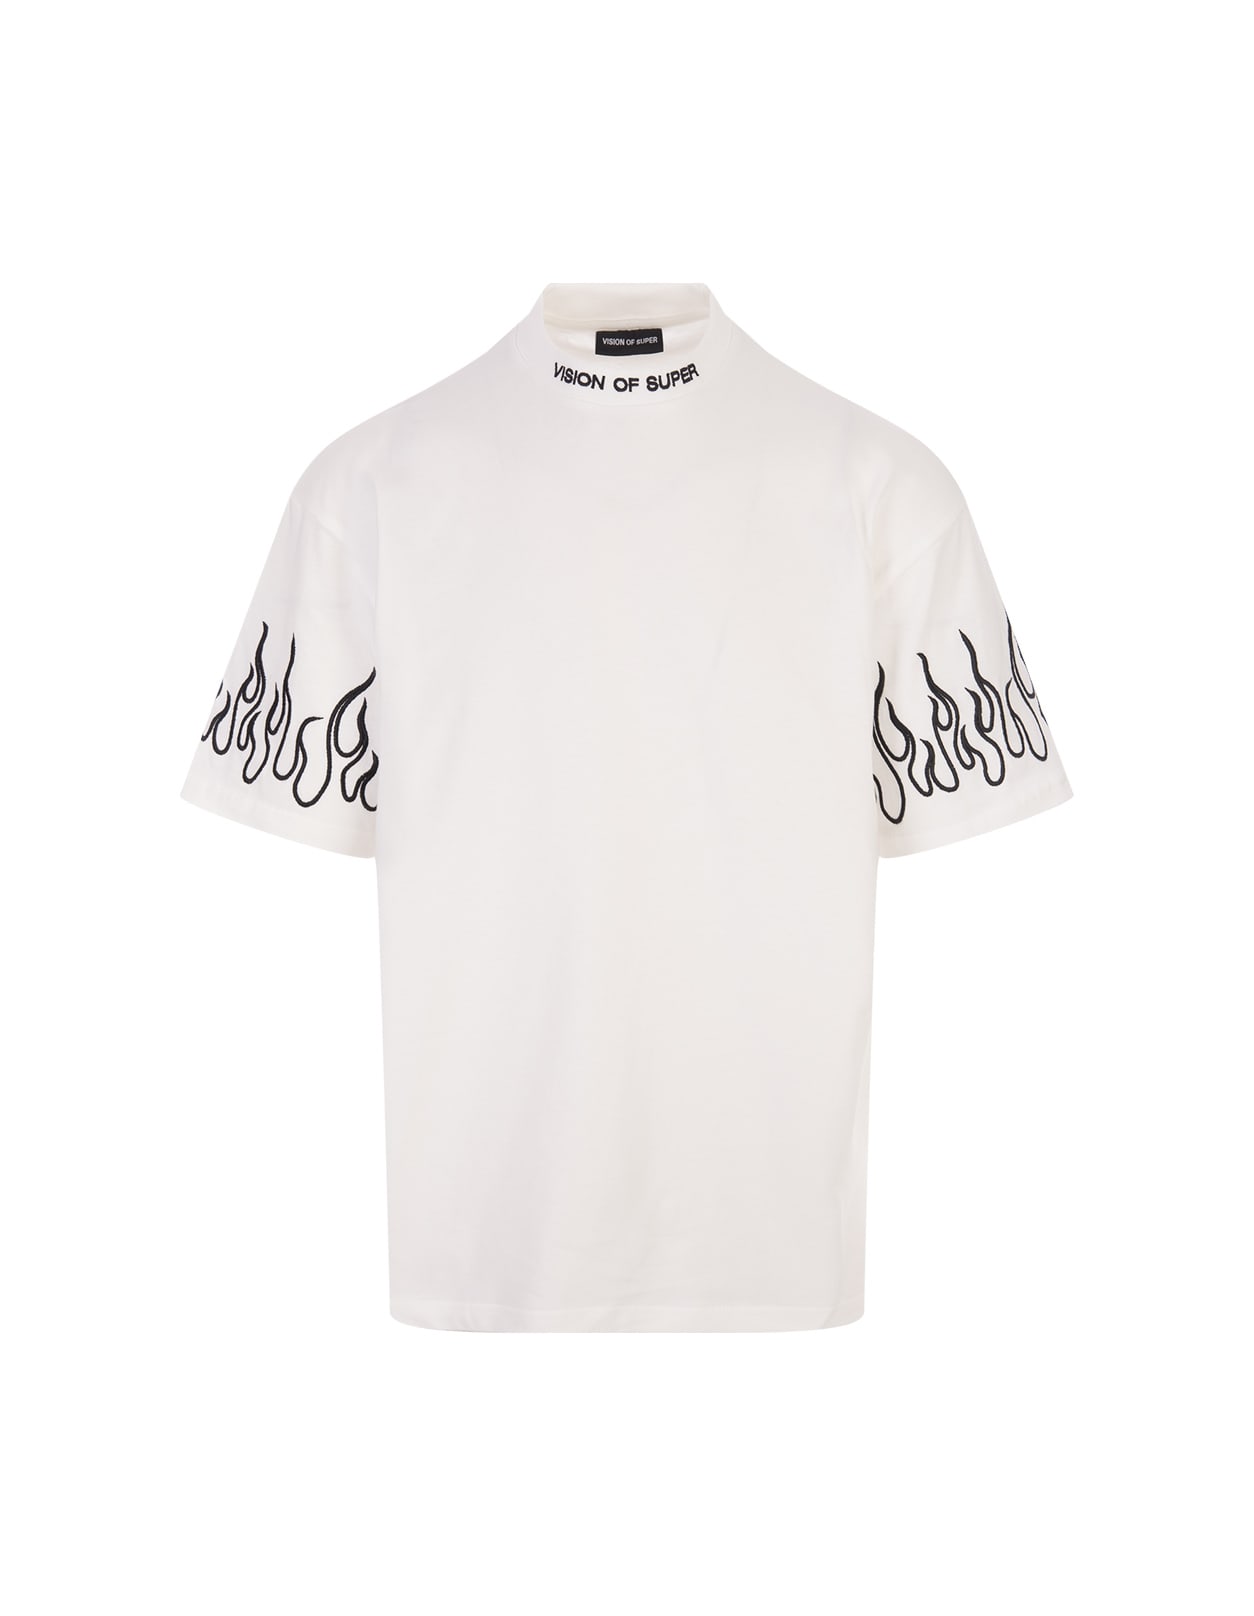 VISION OF SUPER WHITE T-SHIRT WITH EMBROIDERED BLACK FLAMES